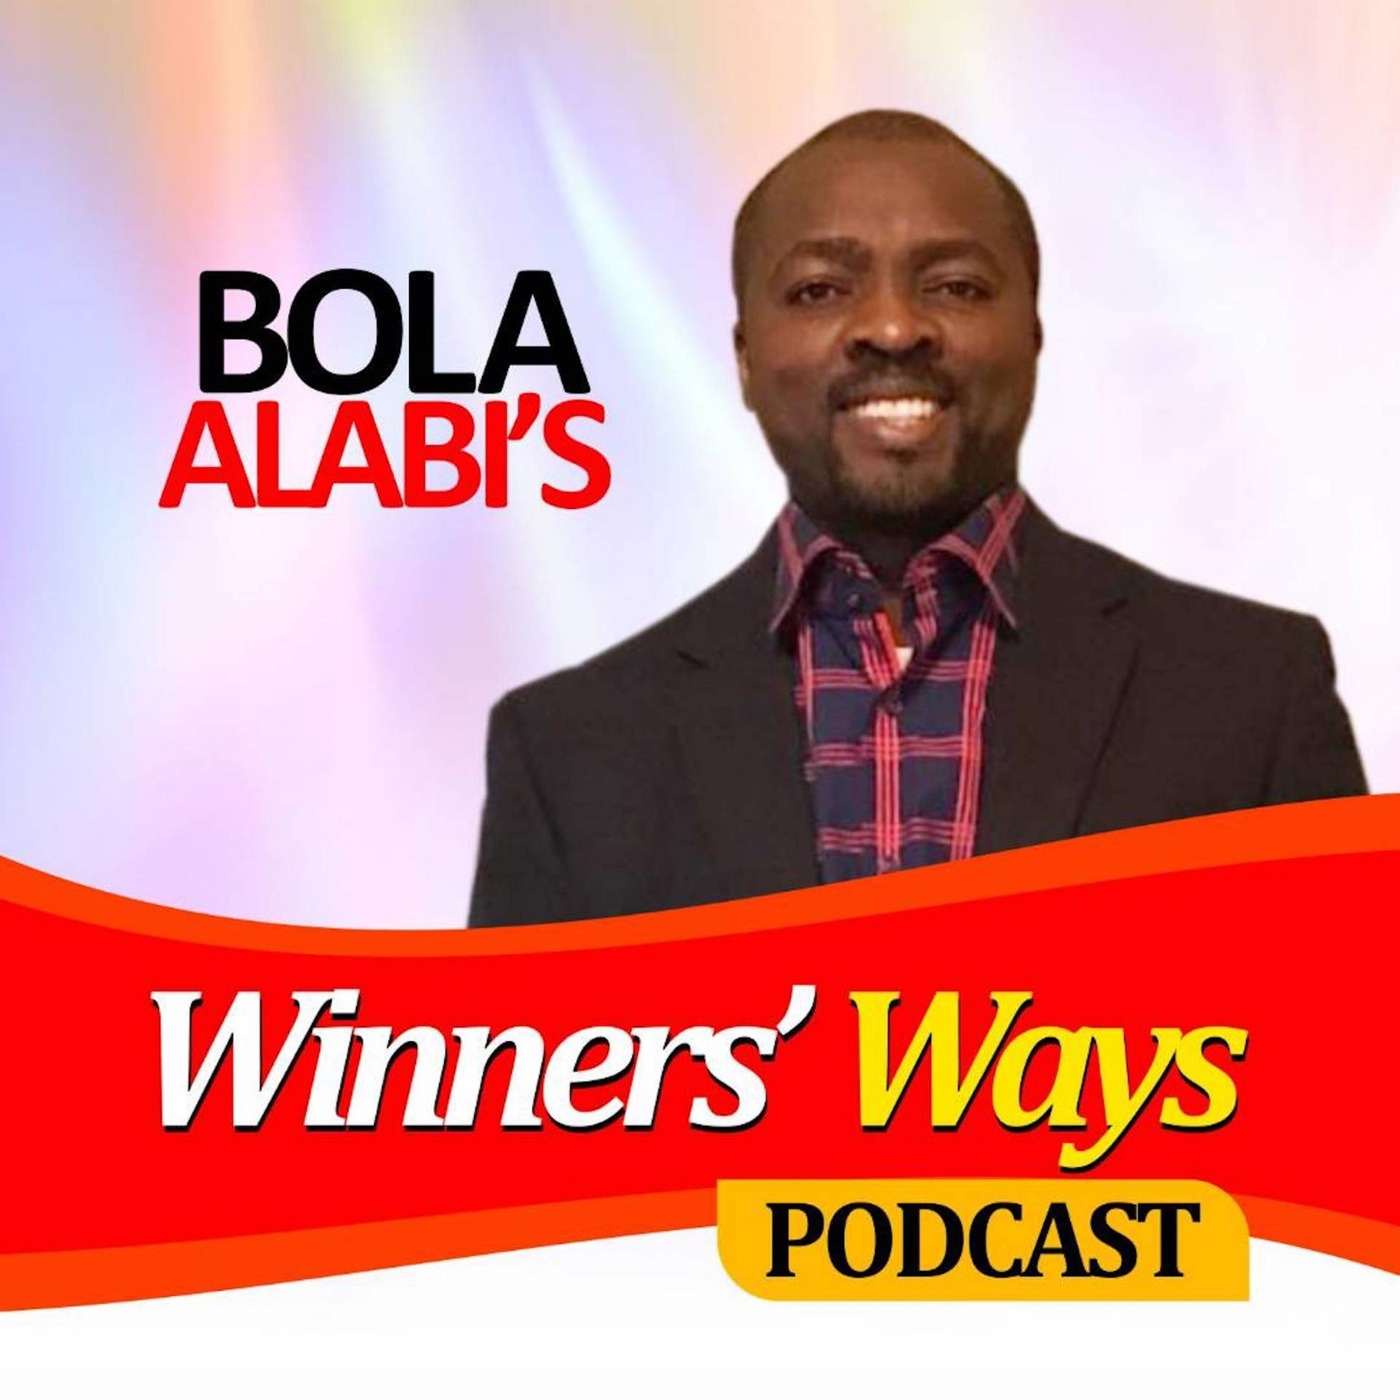 #136: Getting in the game with Bola Alabi